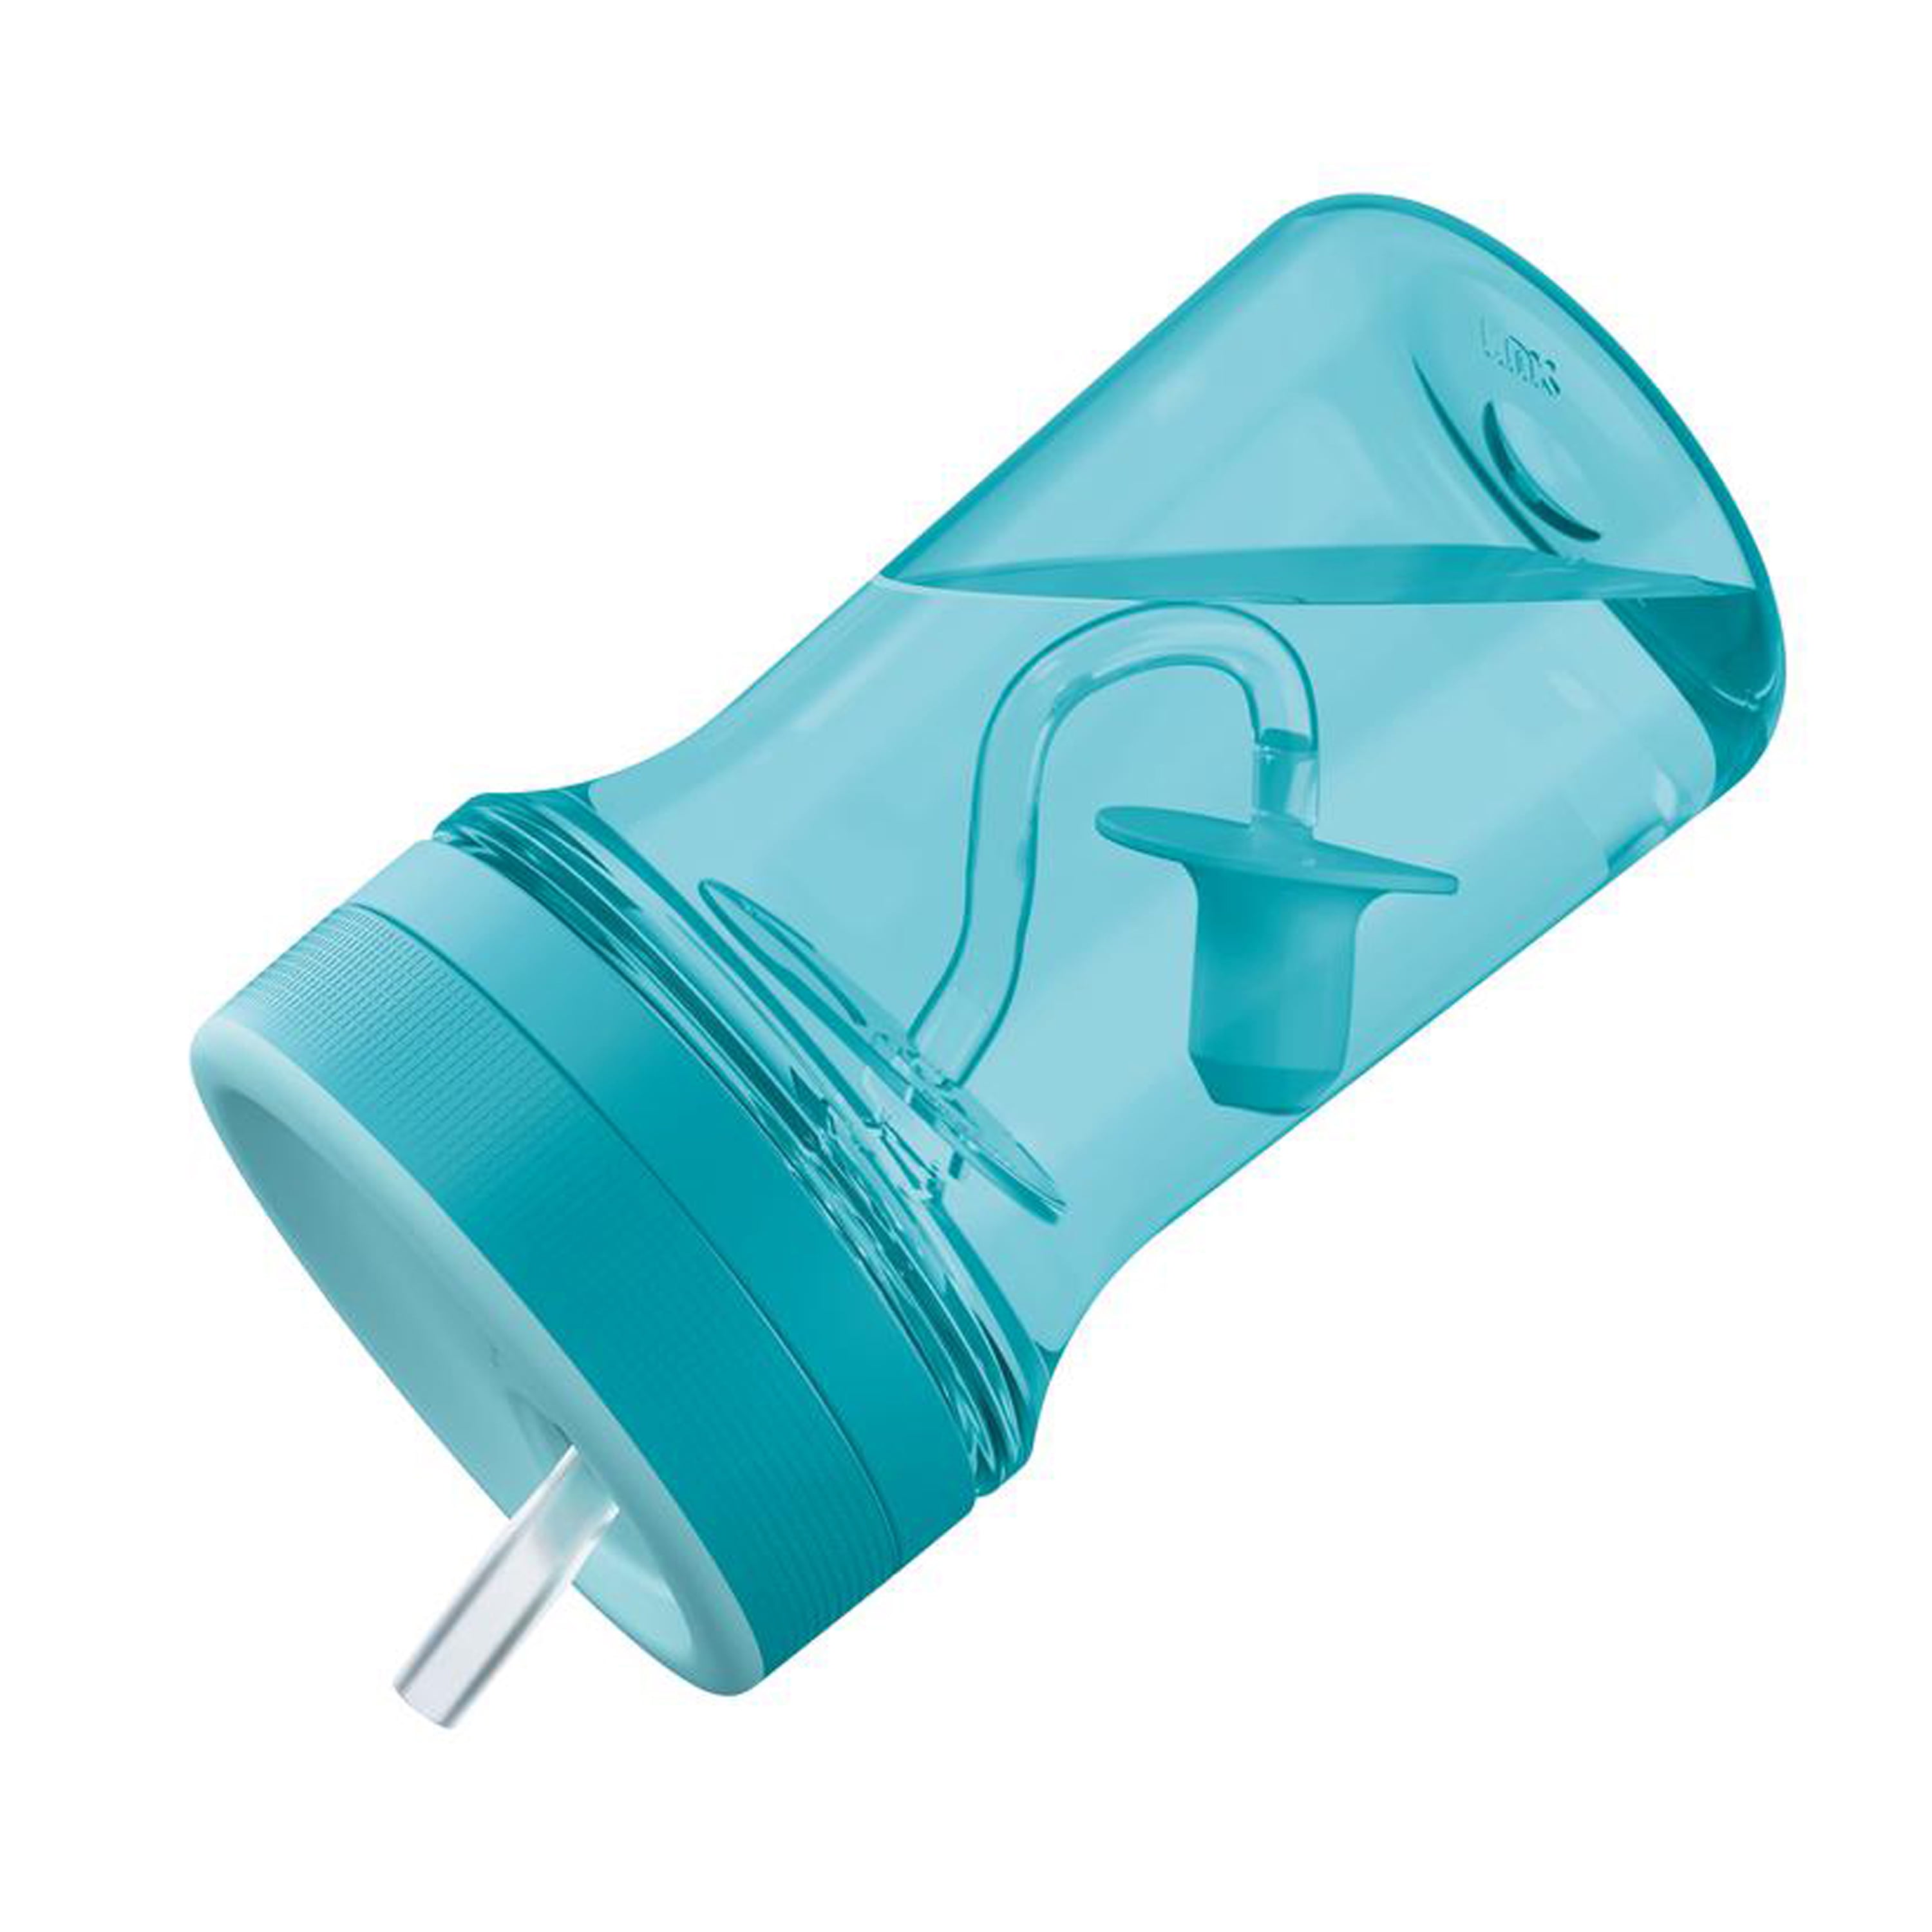 NUK Everlast Leakproof Weighted Straw Cup, 10 oz, 2 Pack, Teal -  Turquoise/Aqua - ShopStyle Kids & Baby Towels